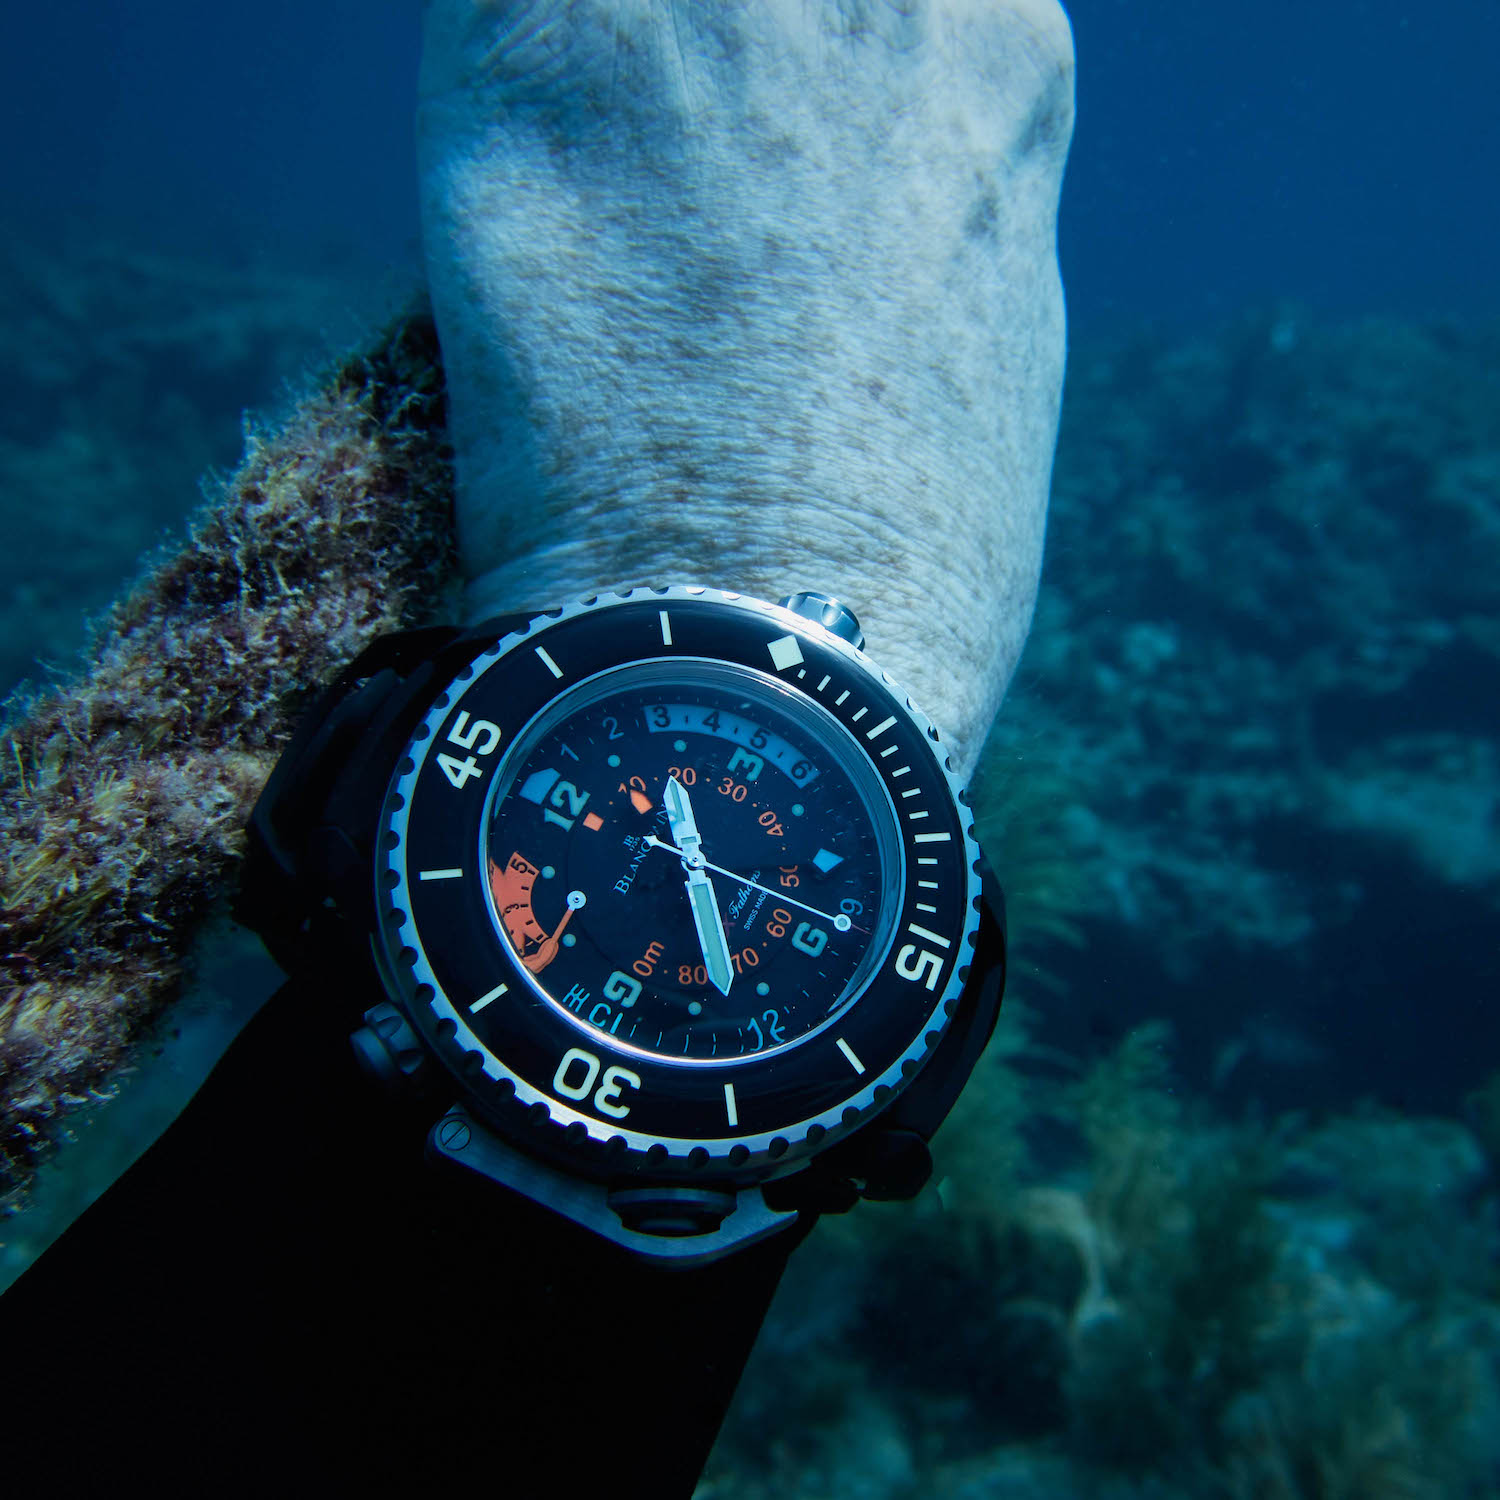 Blancpain Fifty Fathoms X Fathoms - Depth gauge Mechanical diving computer - underwater review